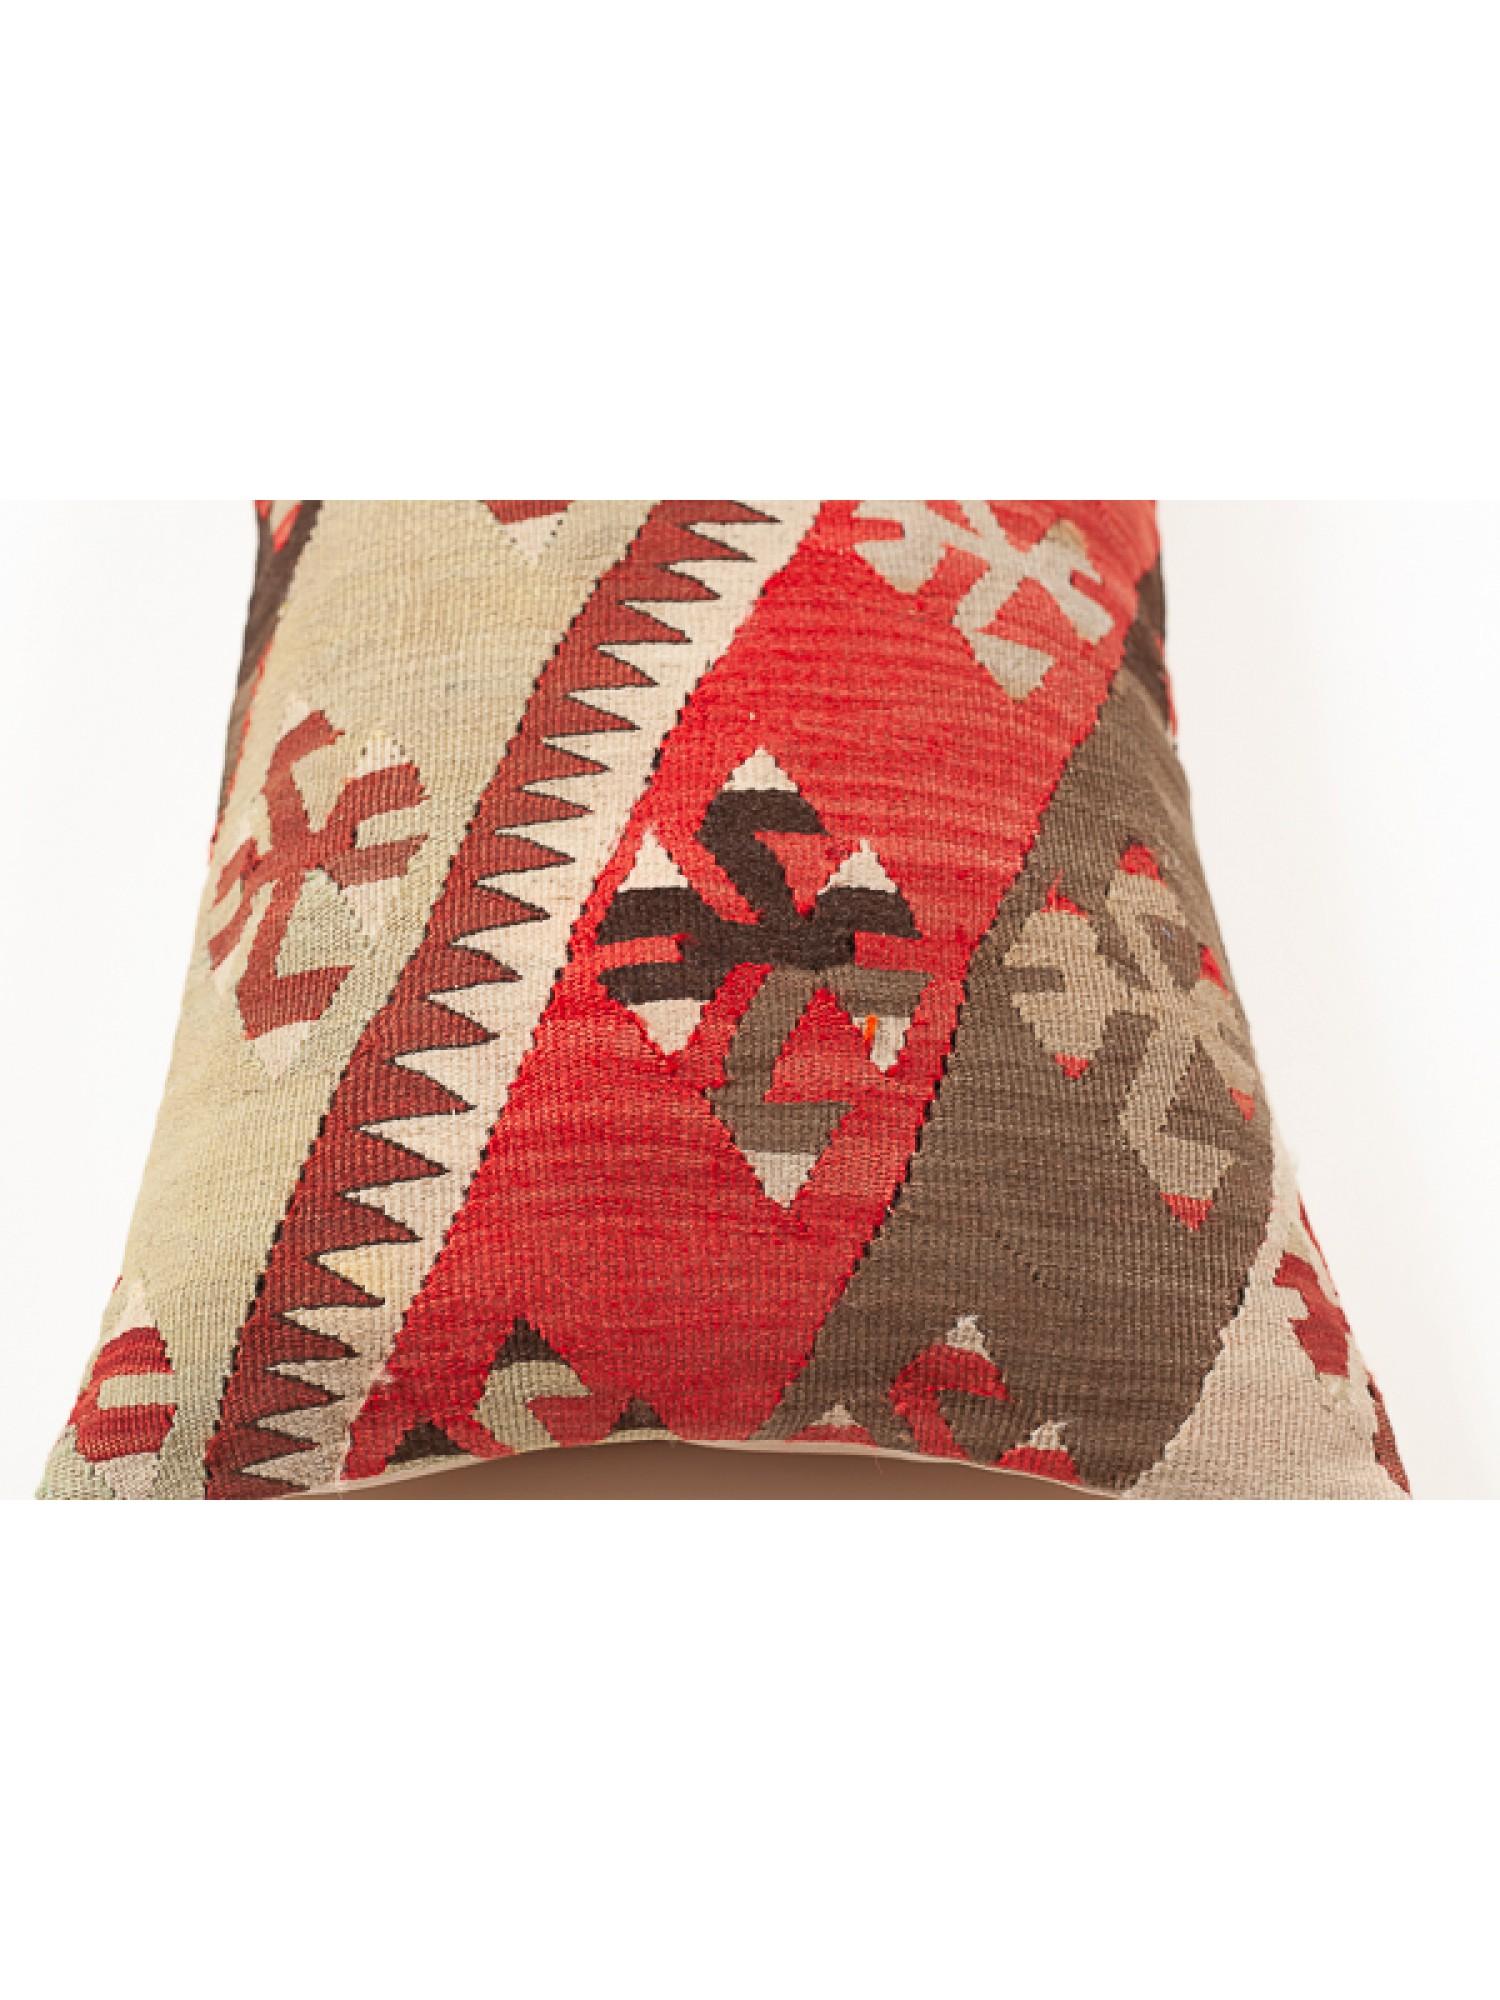 Hand-Woven Antique & Old Kilim Cushion Cover, Turkish Yastik Modern Pillow KC3541 For Sale